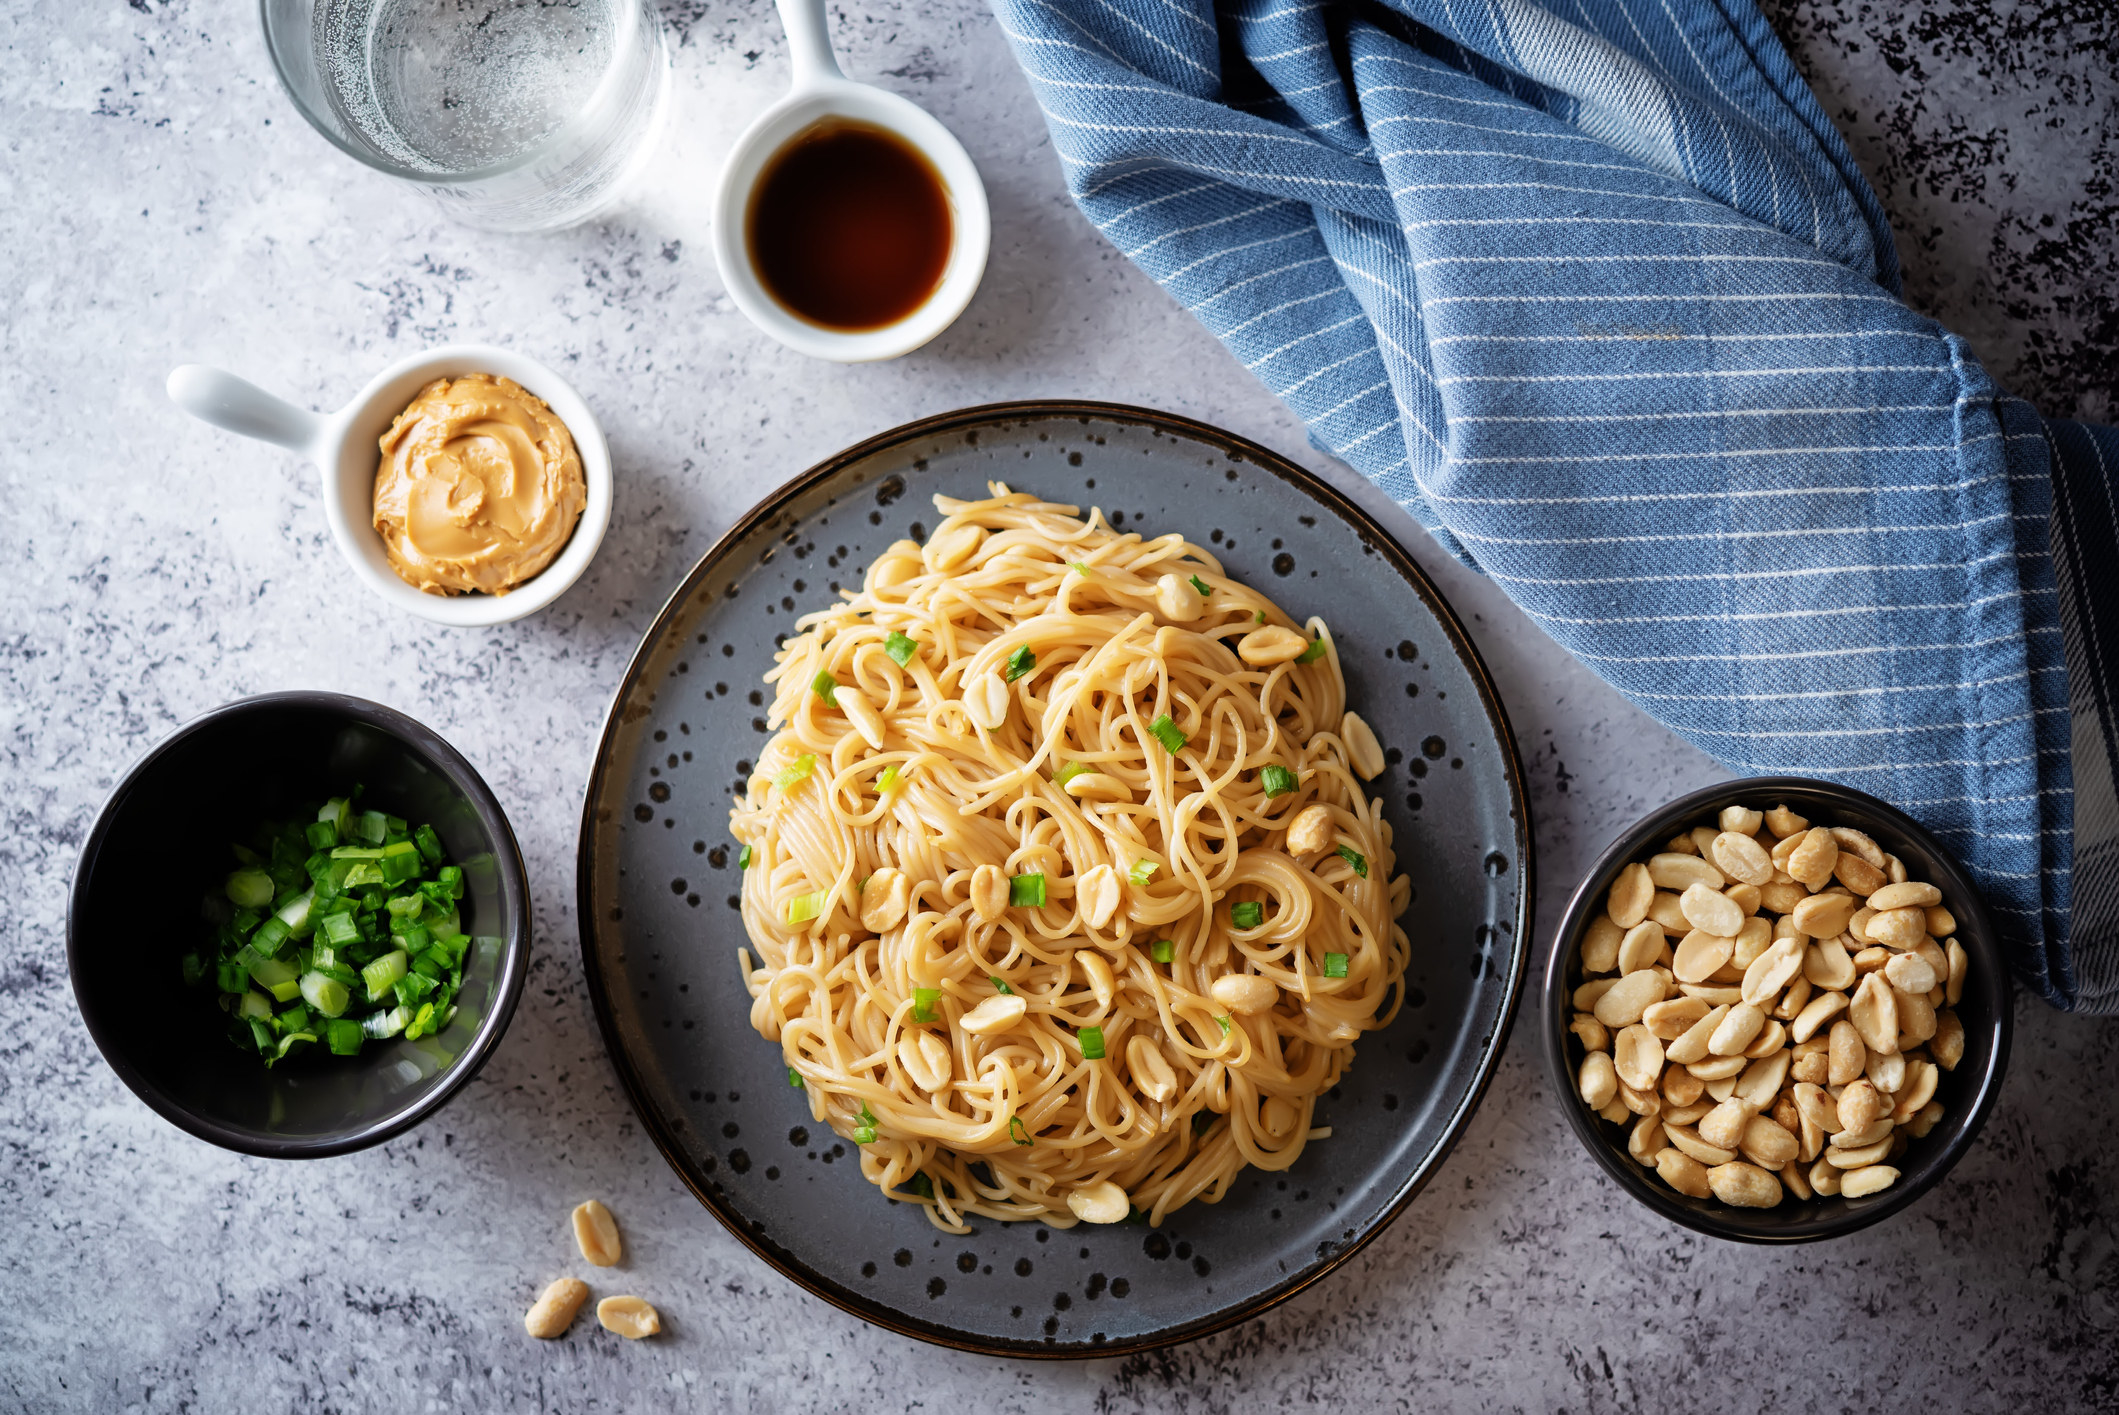 Pasta with peanut butter soy sauce, roasted peanuts, and scallion